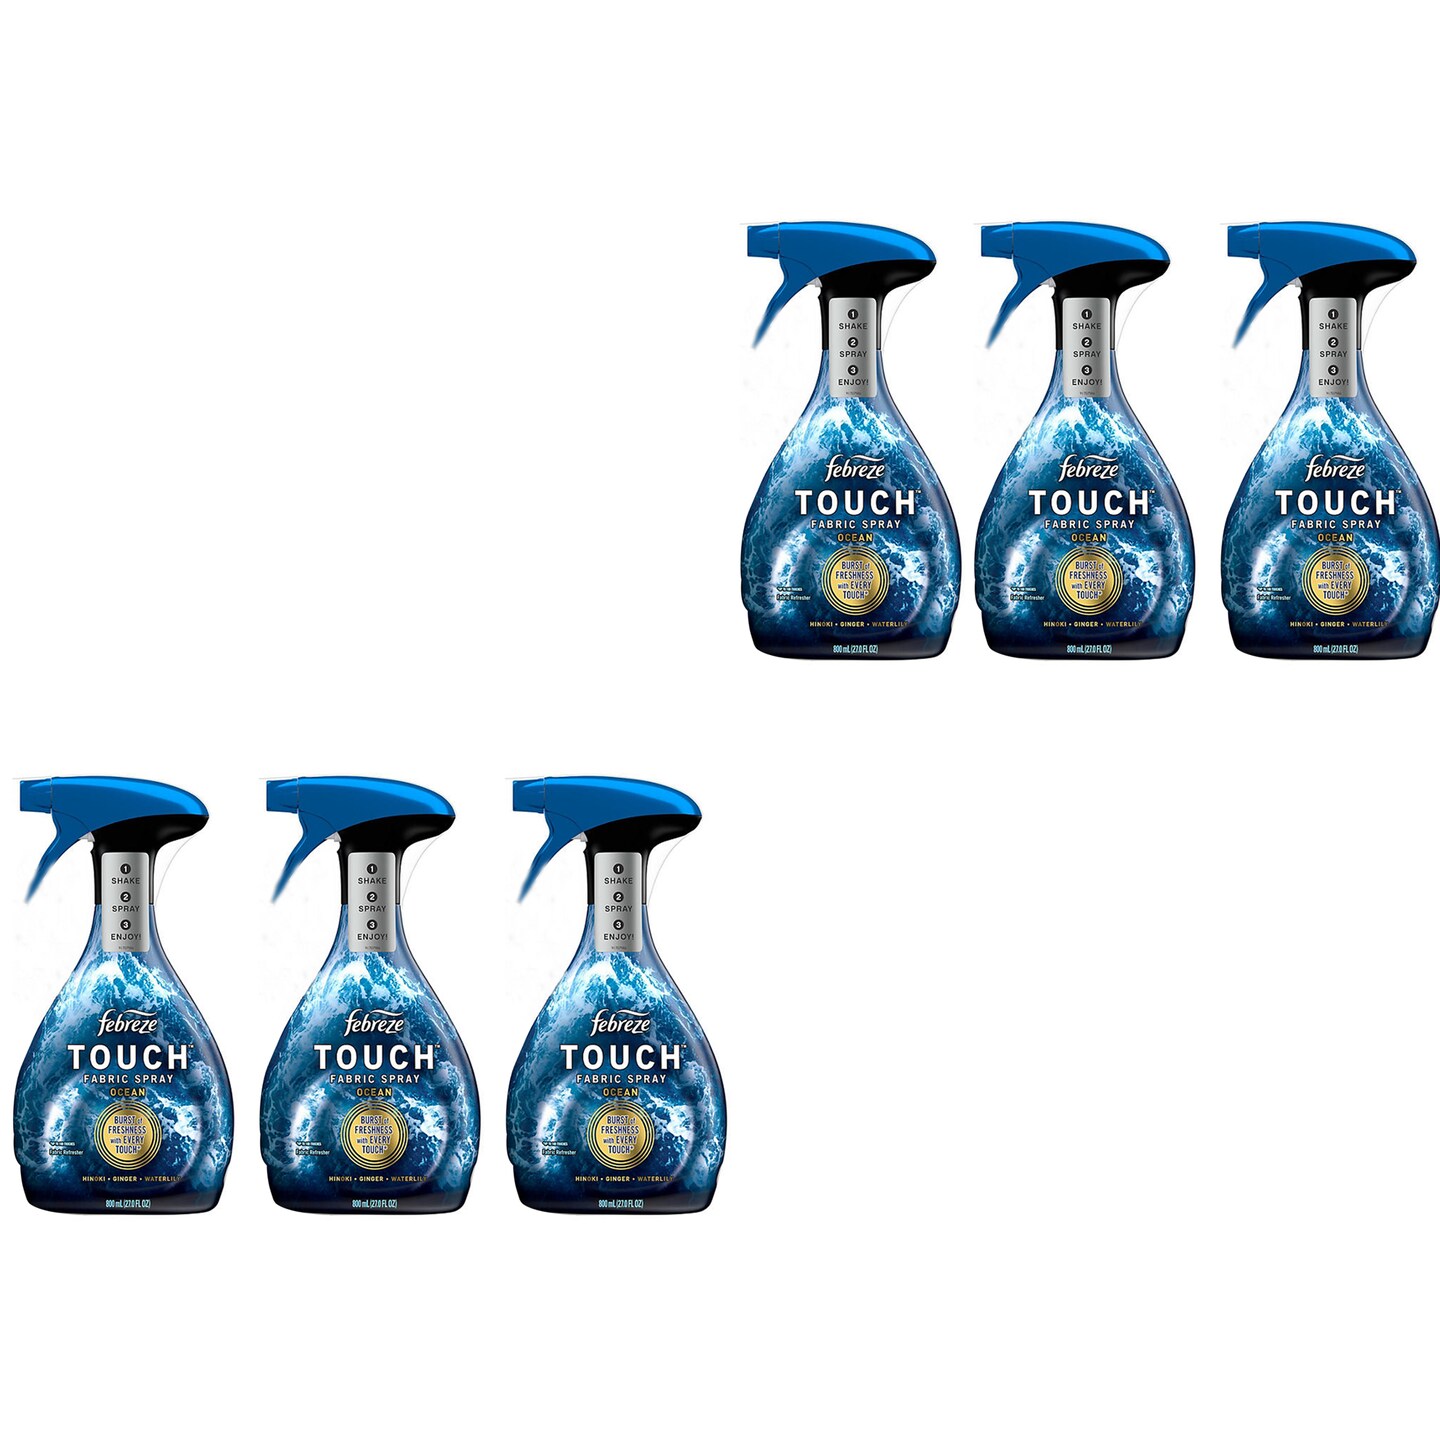 Febreze Fabric Spray, Unstopables Touch Fabric Refresher Spray